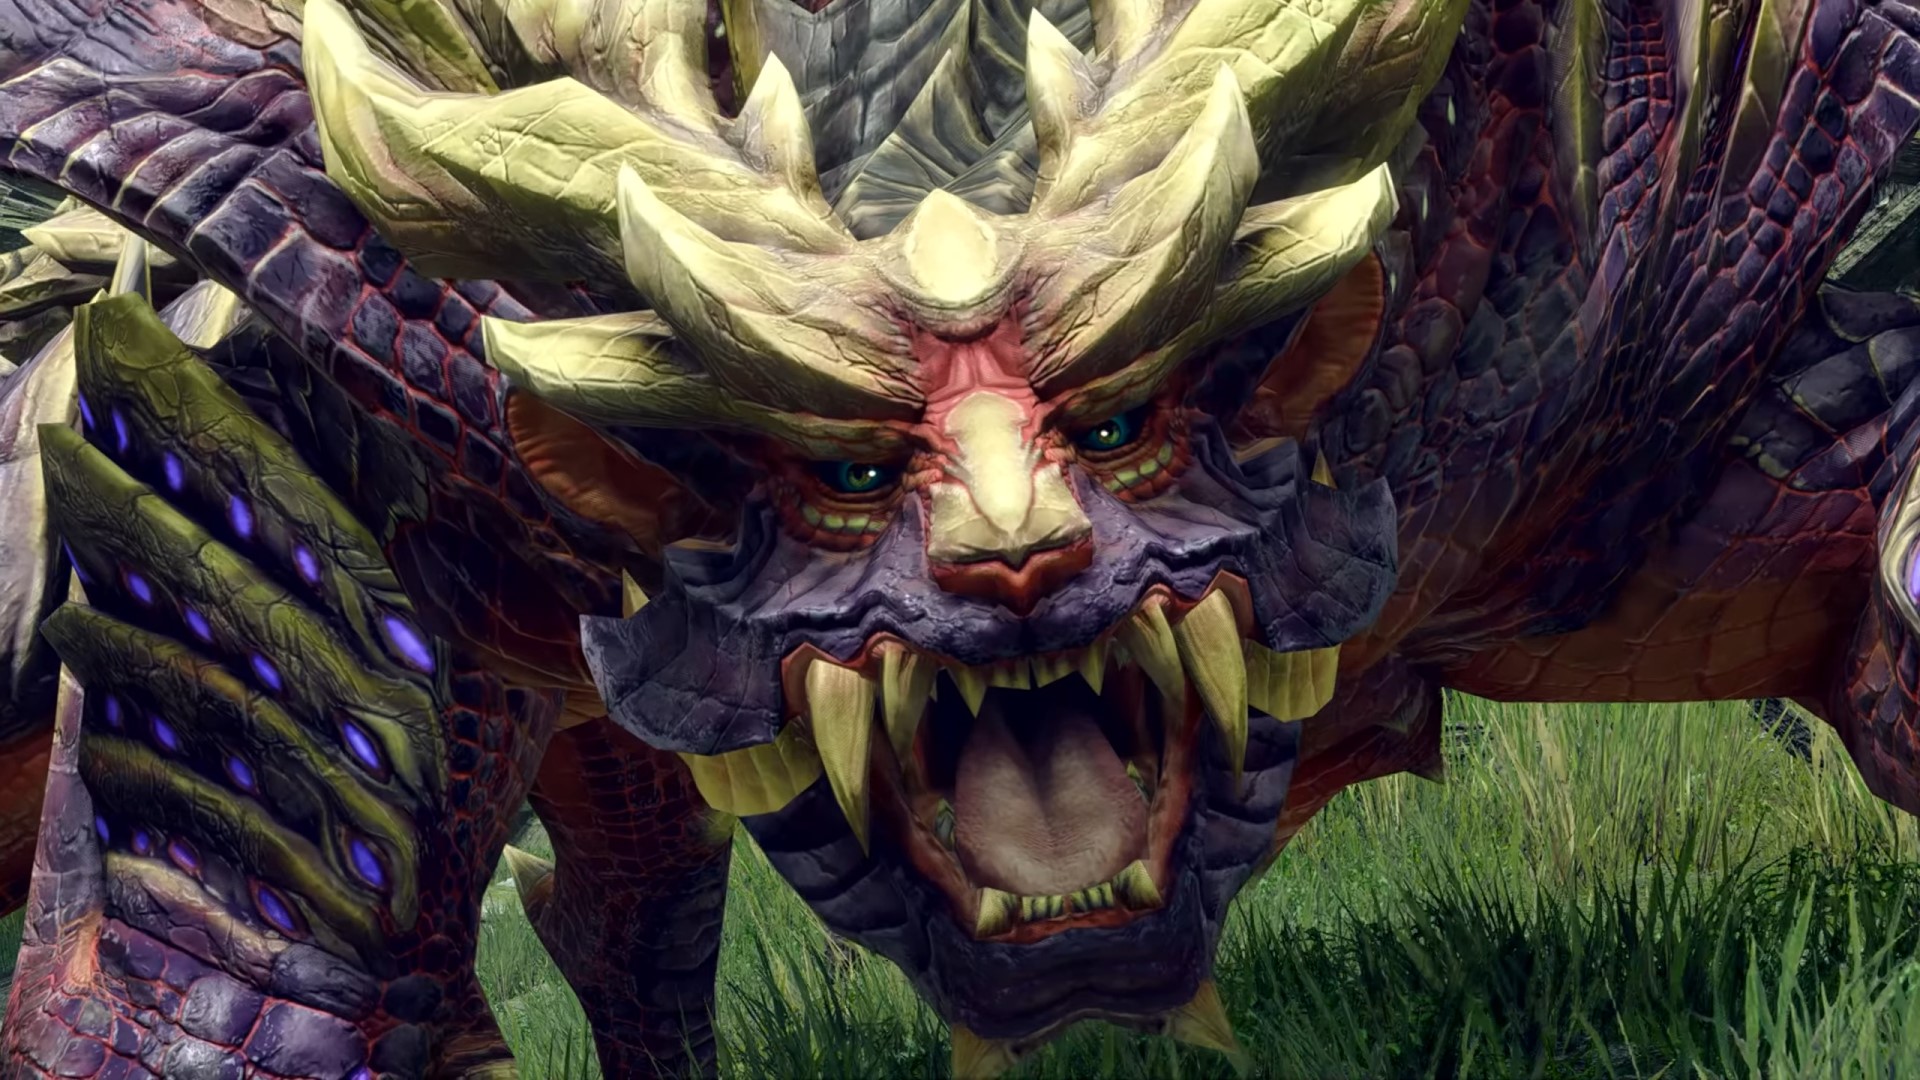 Monster Hunter Rise's Rathalos and Magnamalo look ferocious in 4K